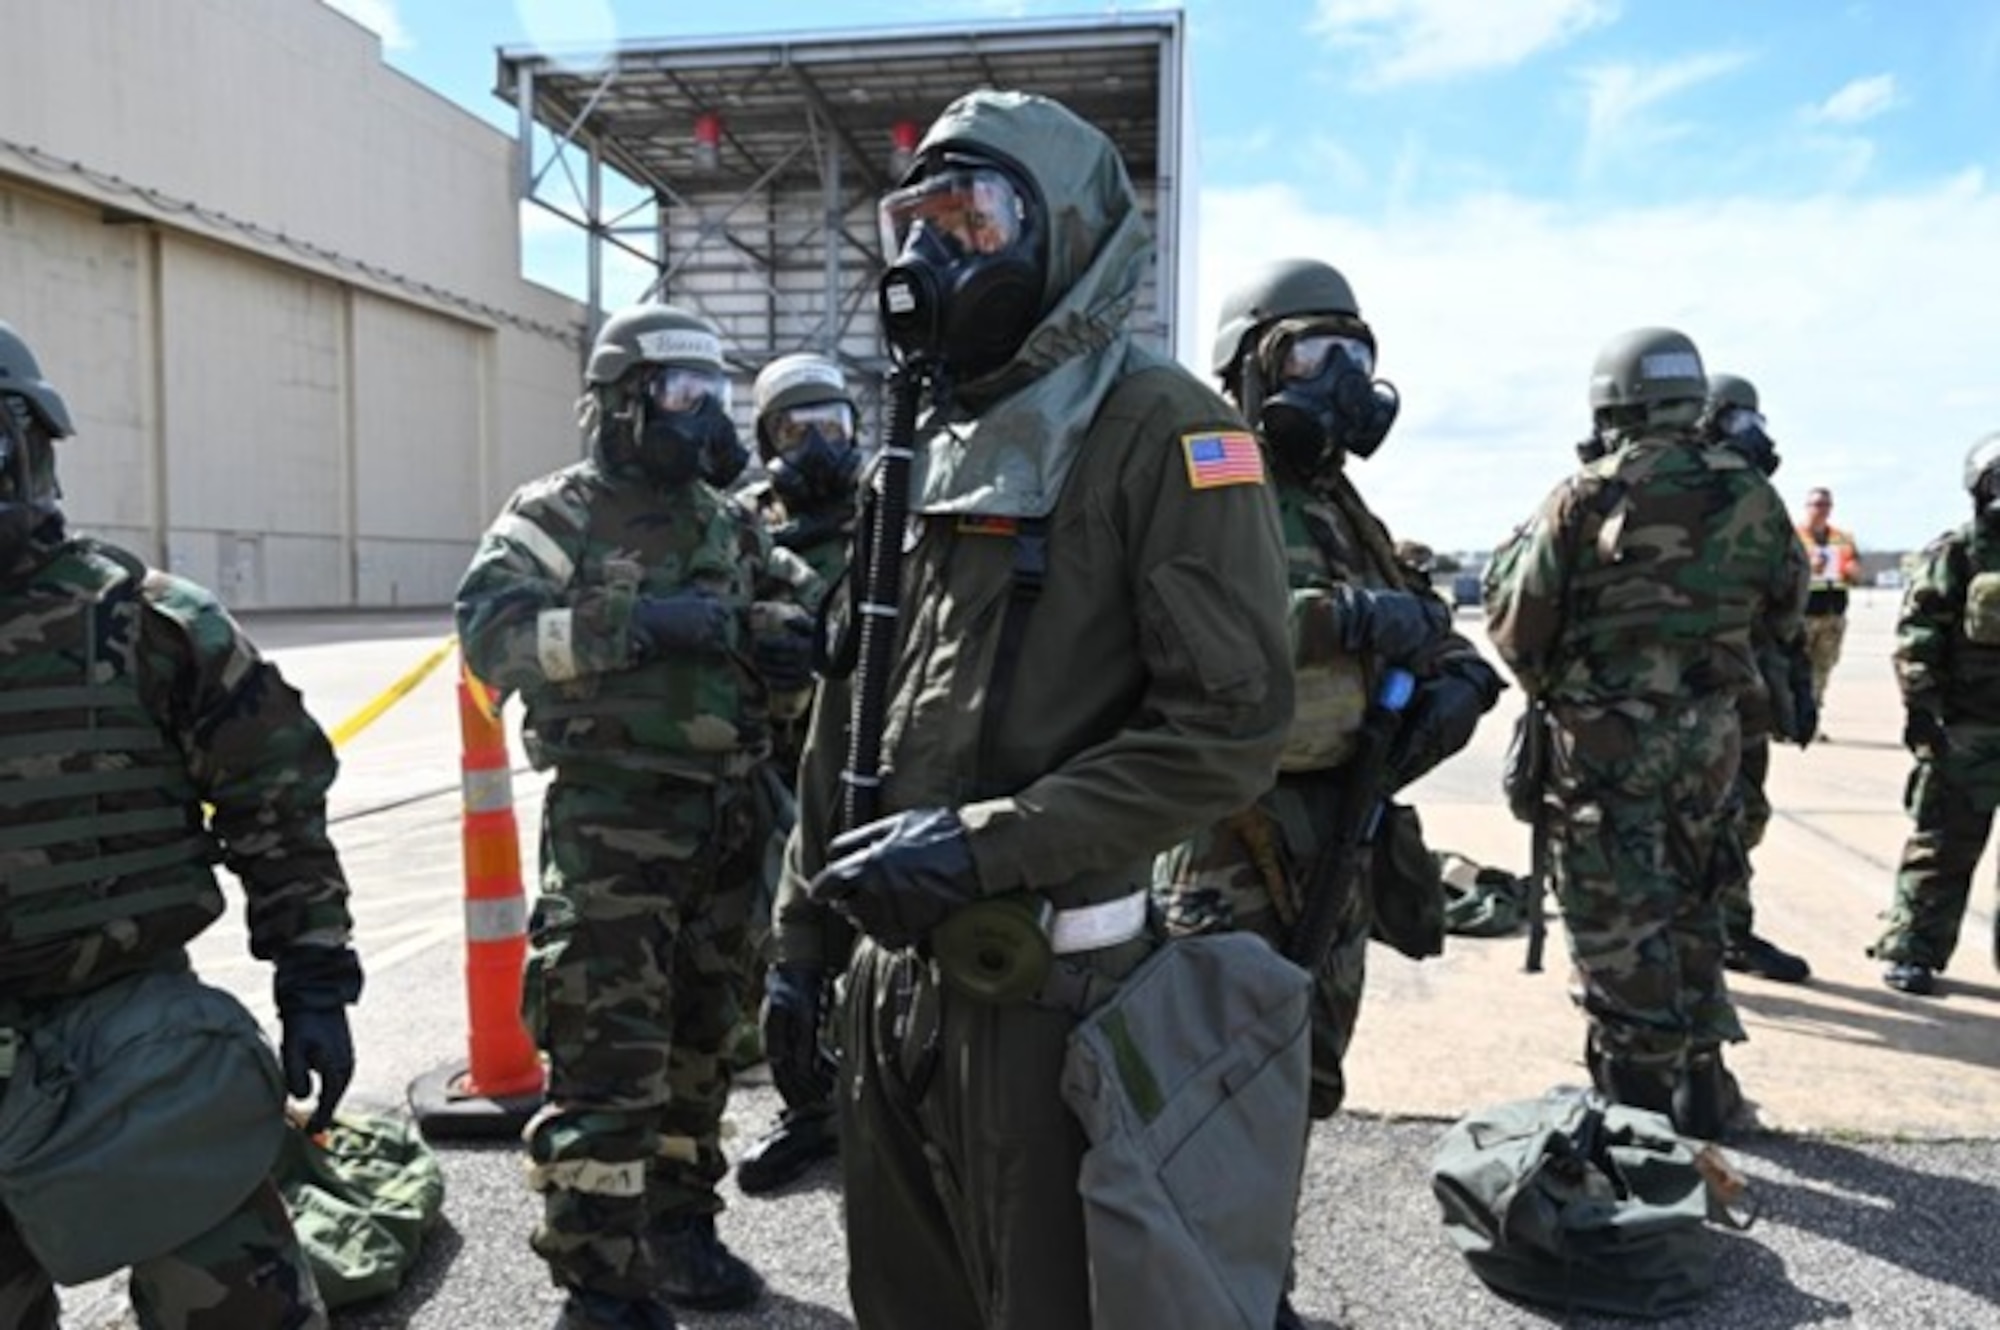 Reserve Citizen Airmen from the 433rd Airlift Wing respond to a chemical attack during Exercise Dragon’s Den at Joint Base San Antonio-Lackland, Texas on Feb. 7, 2024.